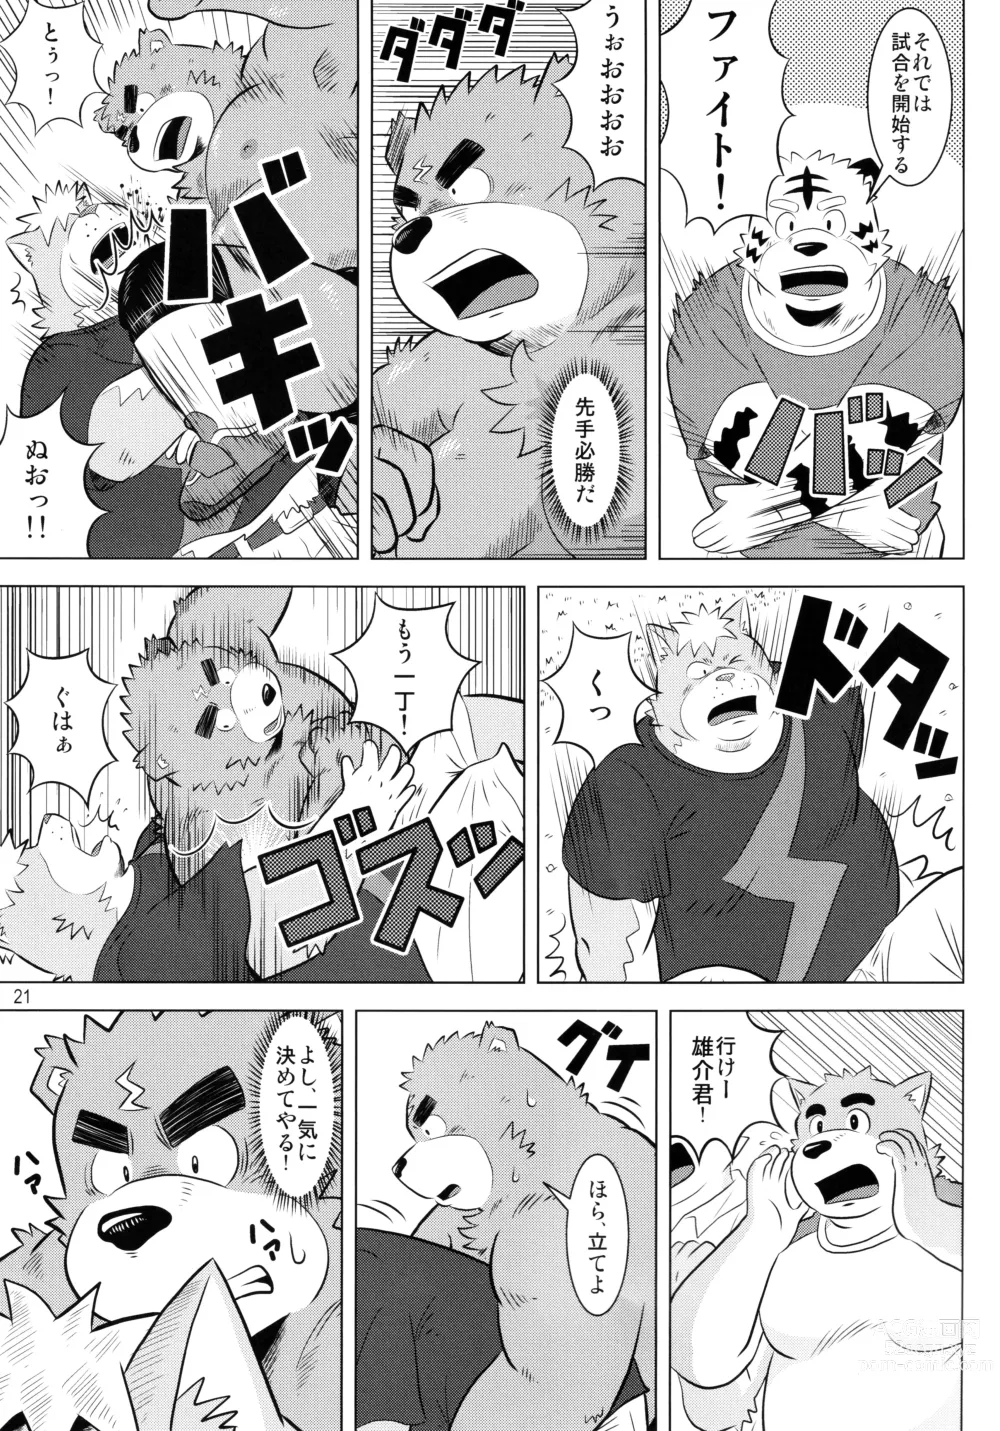 Page 22 of doujinshi BFW -BEAST FIGHTER WRESTLING-